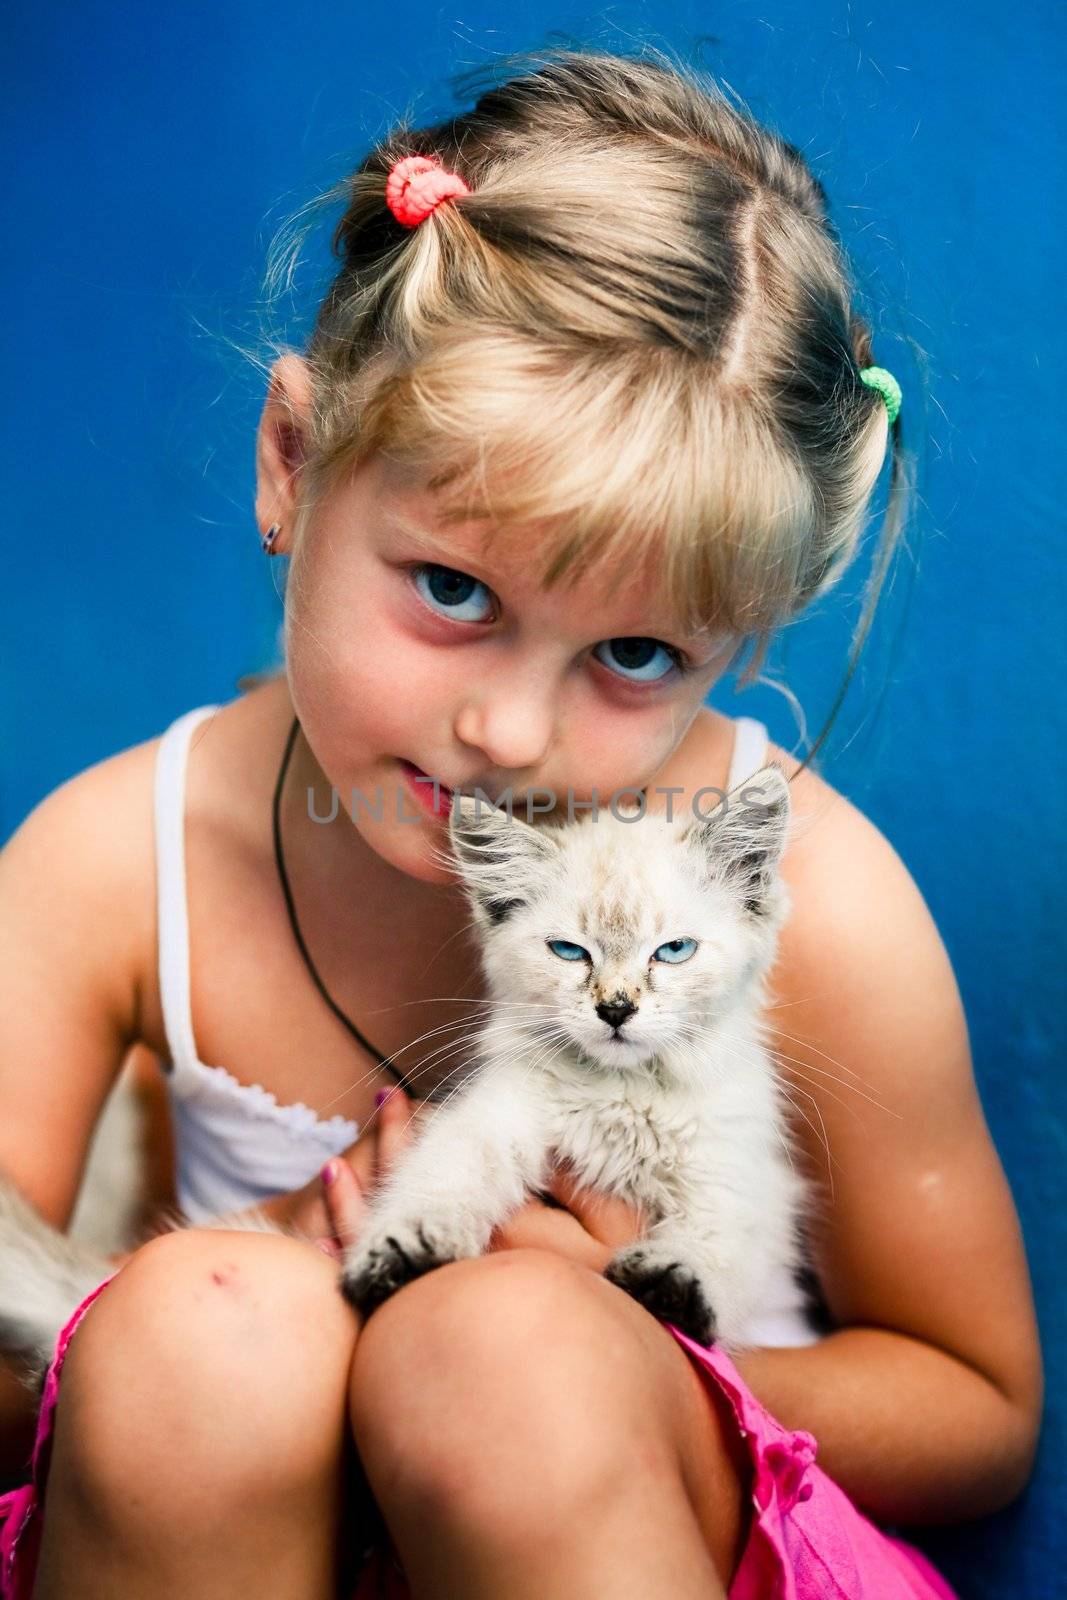 Smiling girl with a small kitten in her arms